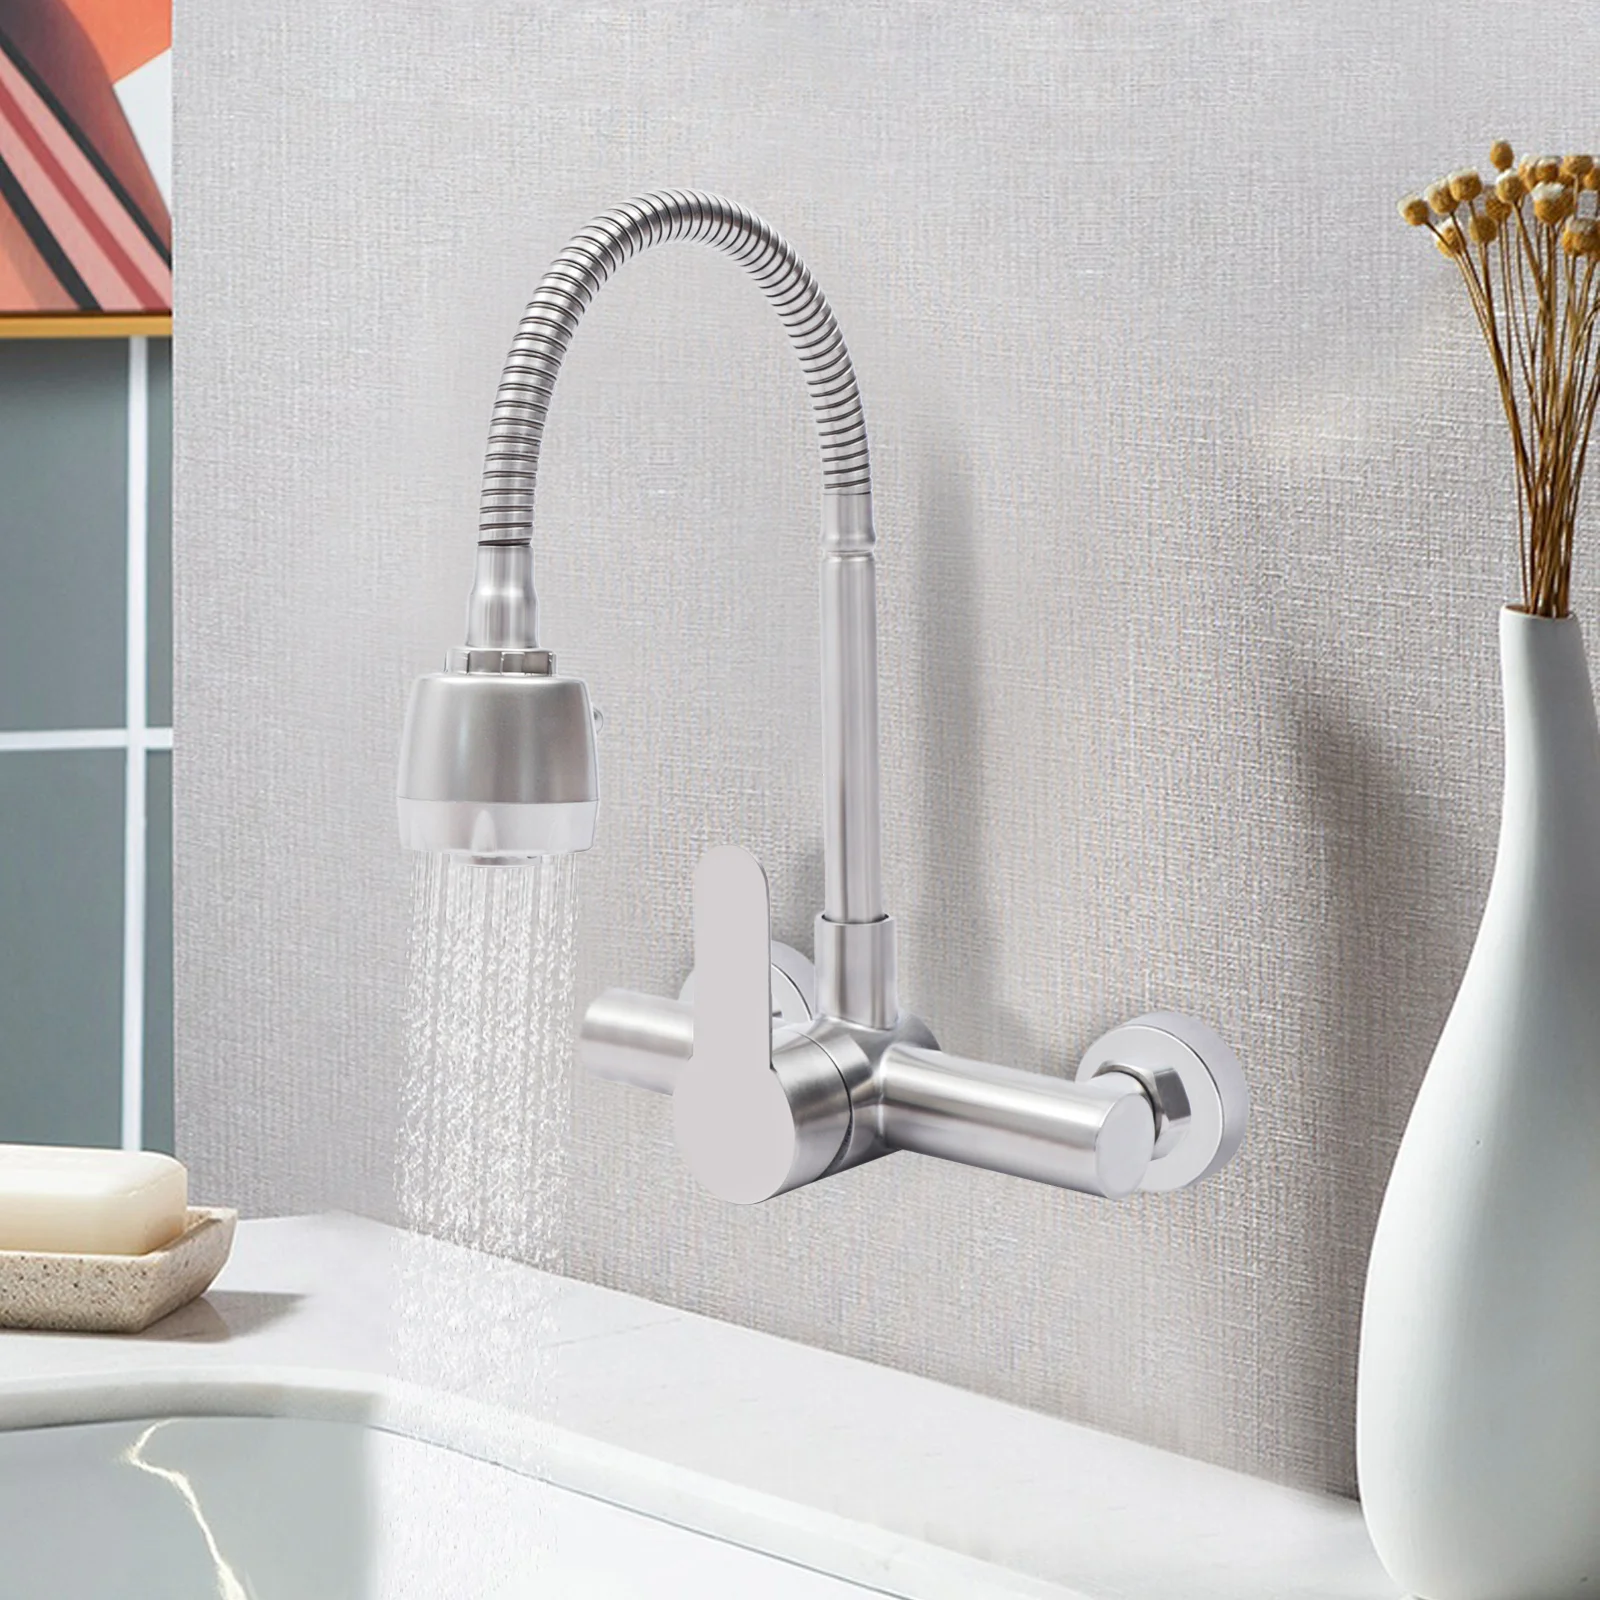 

Wall Mount Faucet Kitchen Center Brushed Single Handle Sprayer Mixer Stainless Steel Constructed Bar Tap